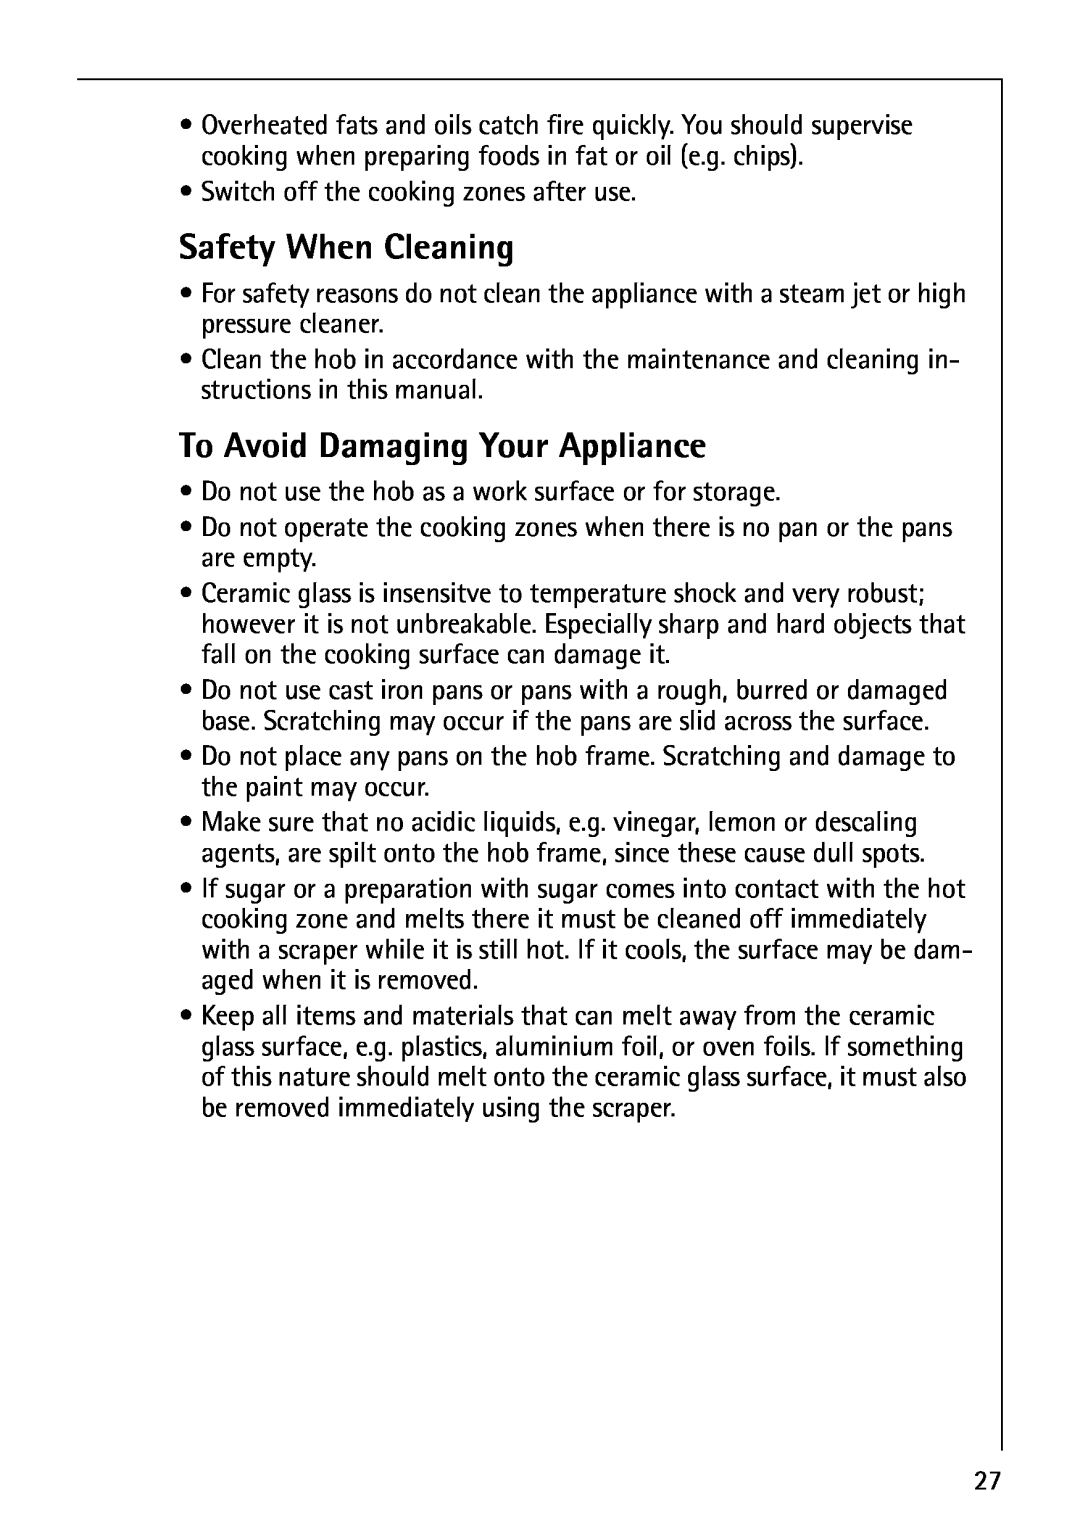 Electrolux 6000K manual Safety When Cleaning, To Avoid Damaging Your Appliance 